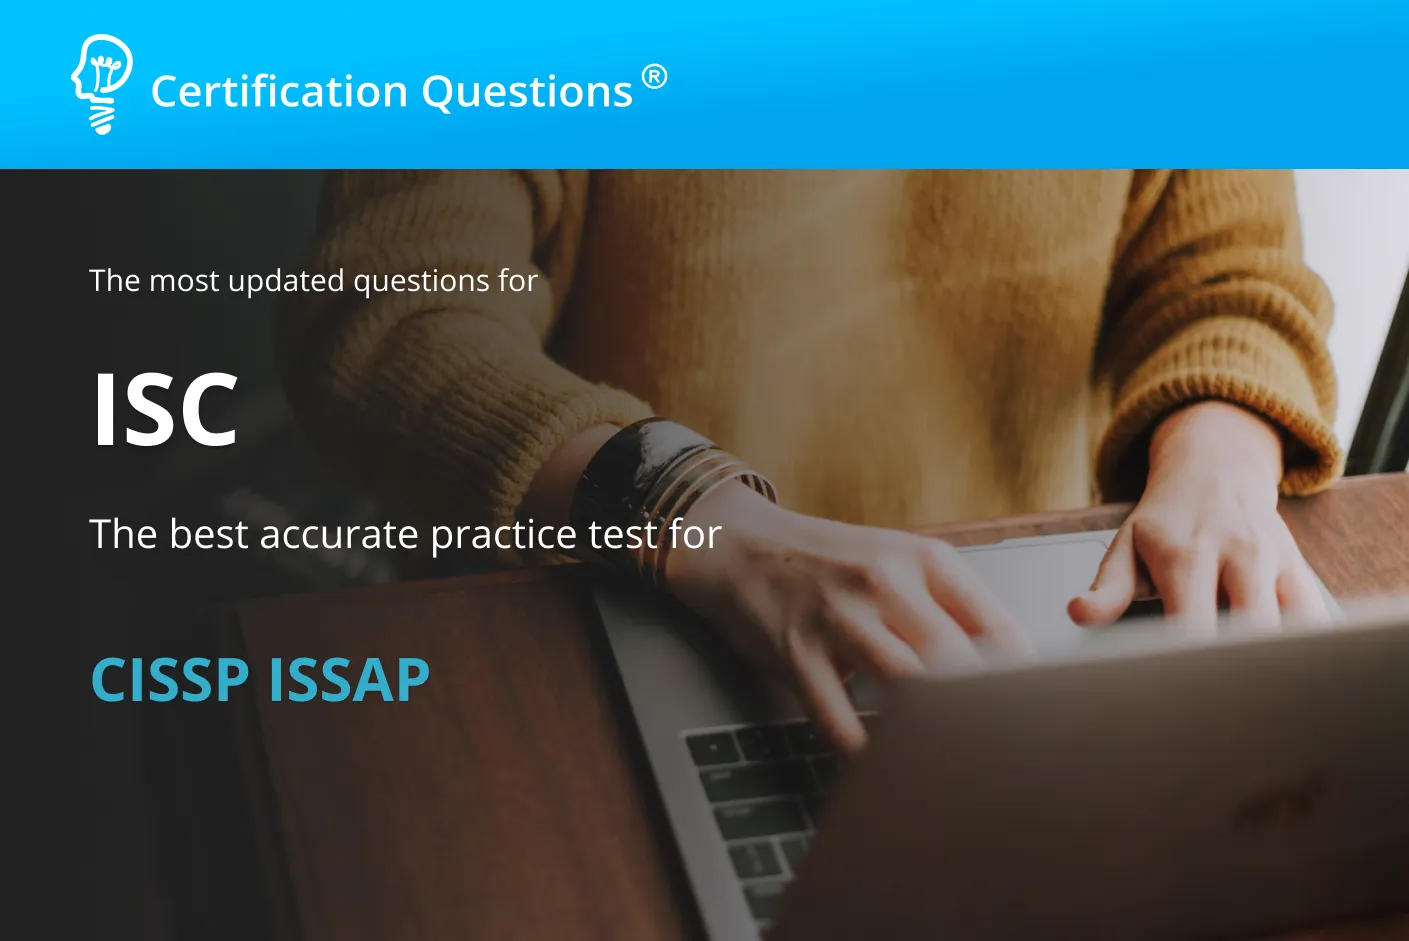 Here is the image for the study guide of the issep exam questions.